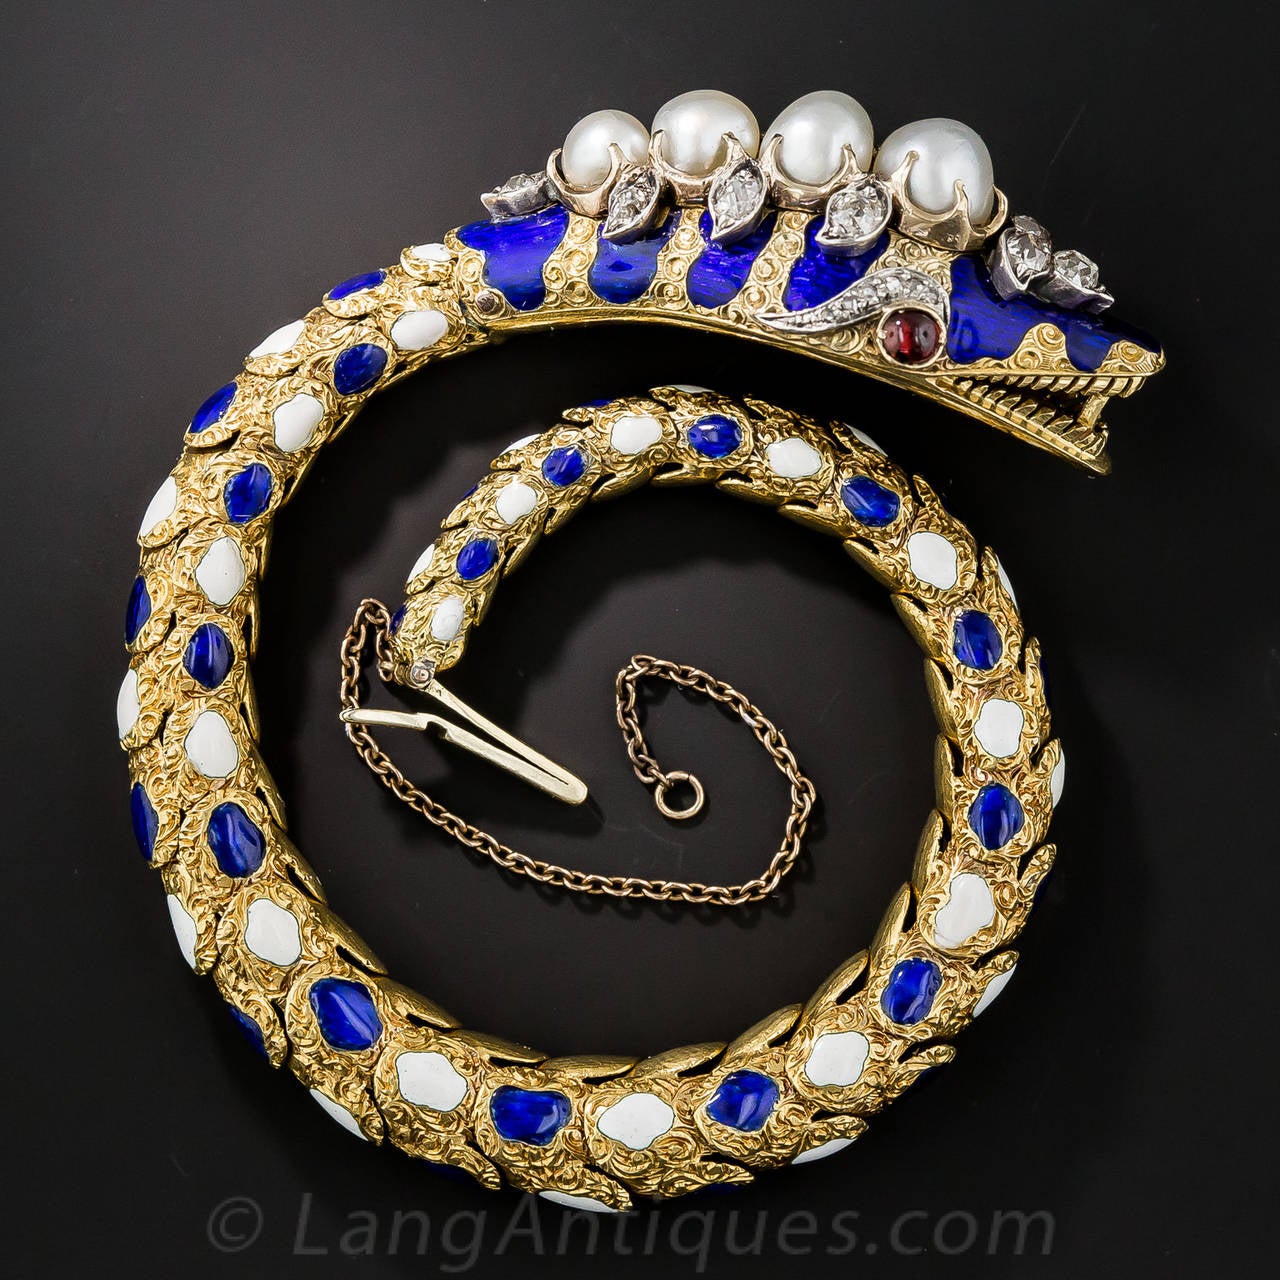 Here is a splendid example of an original nineteenth century snake bracelet on which countless copies were based during the 1960s. The lithe and supple scaled bracelet is hand crafted in richly textured, hand engraved 18K yellow gold and is